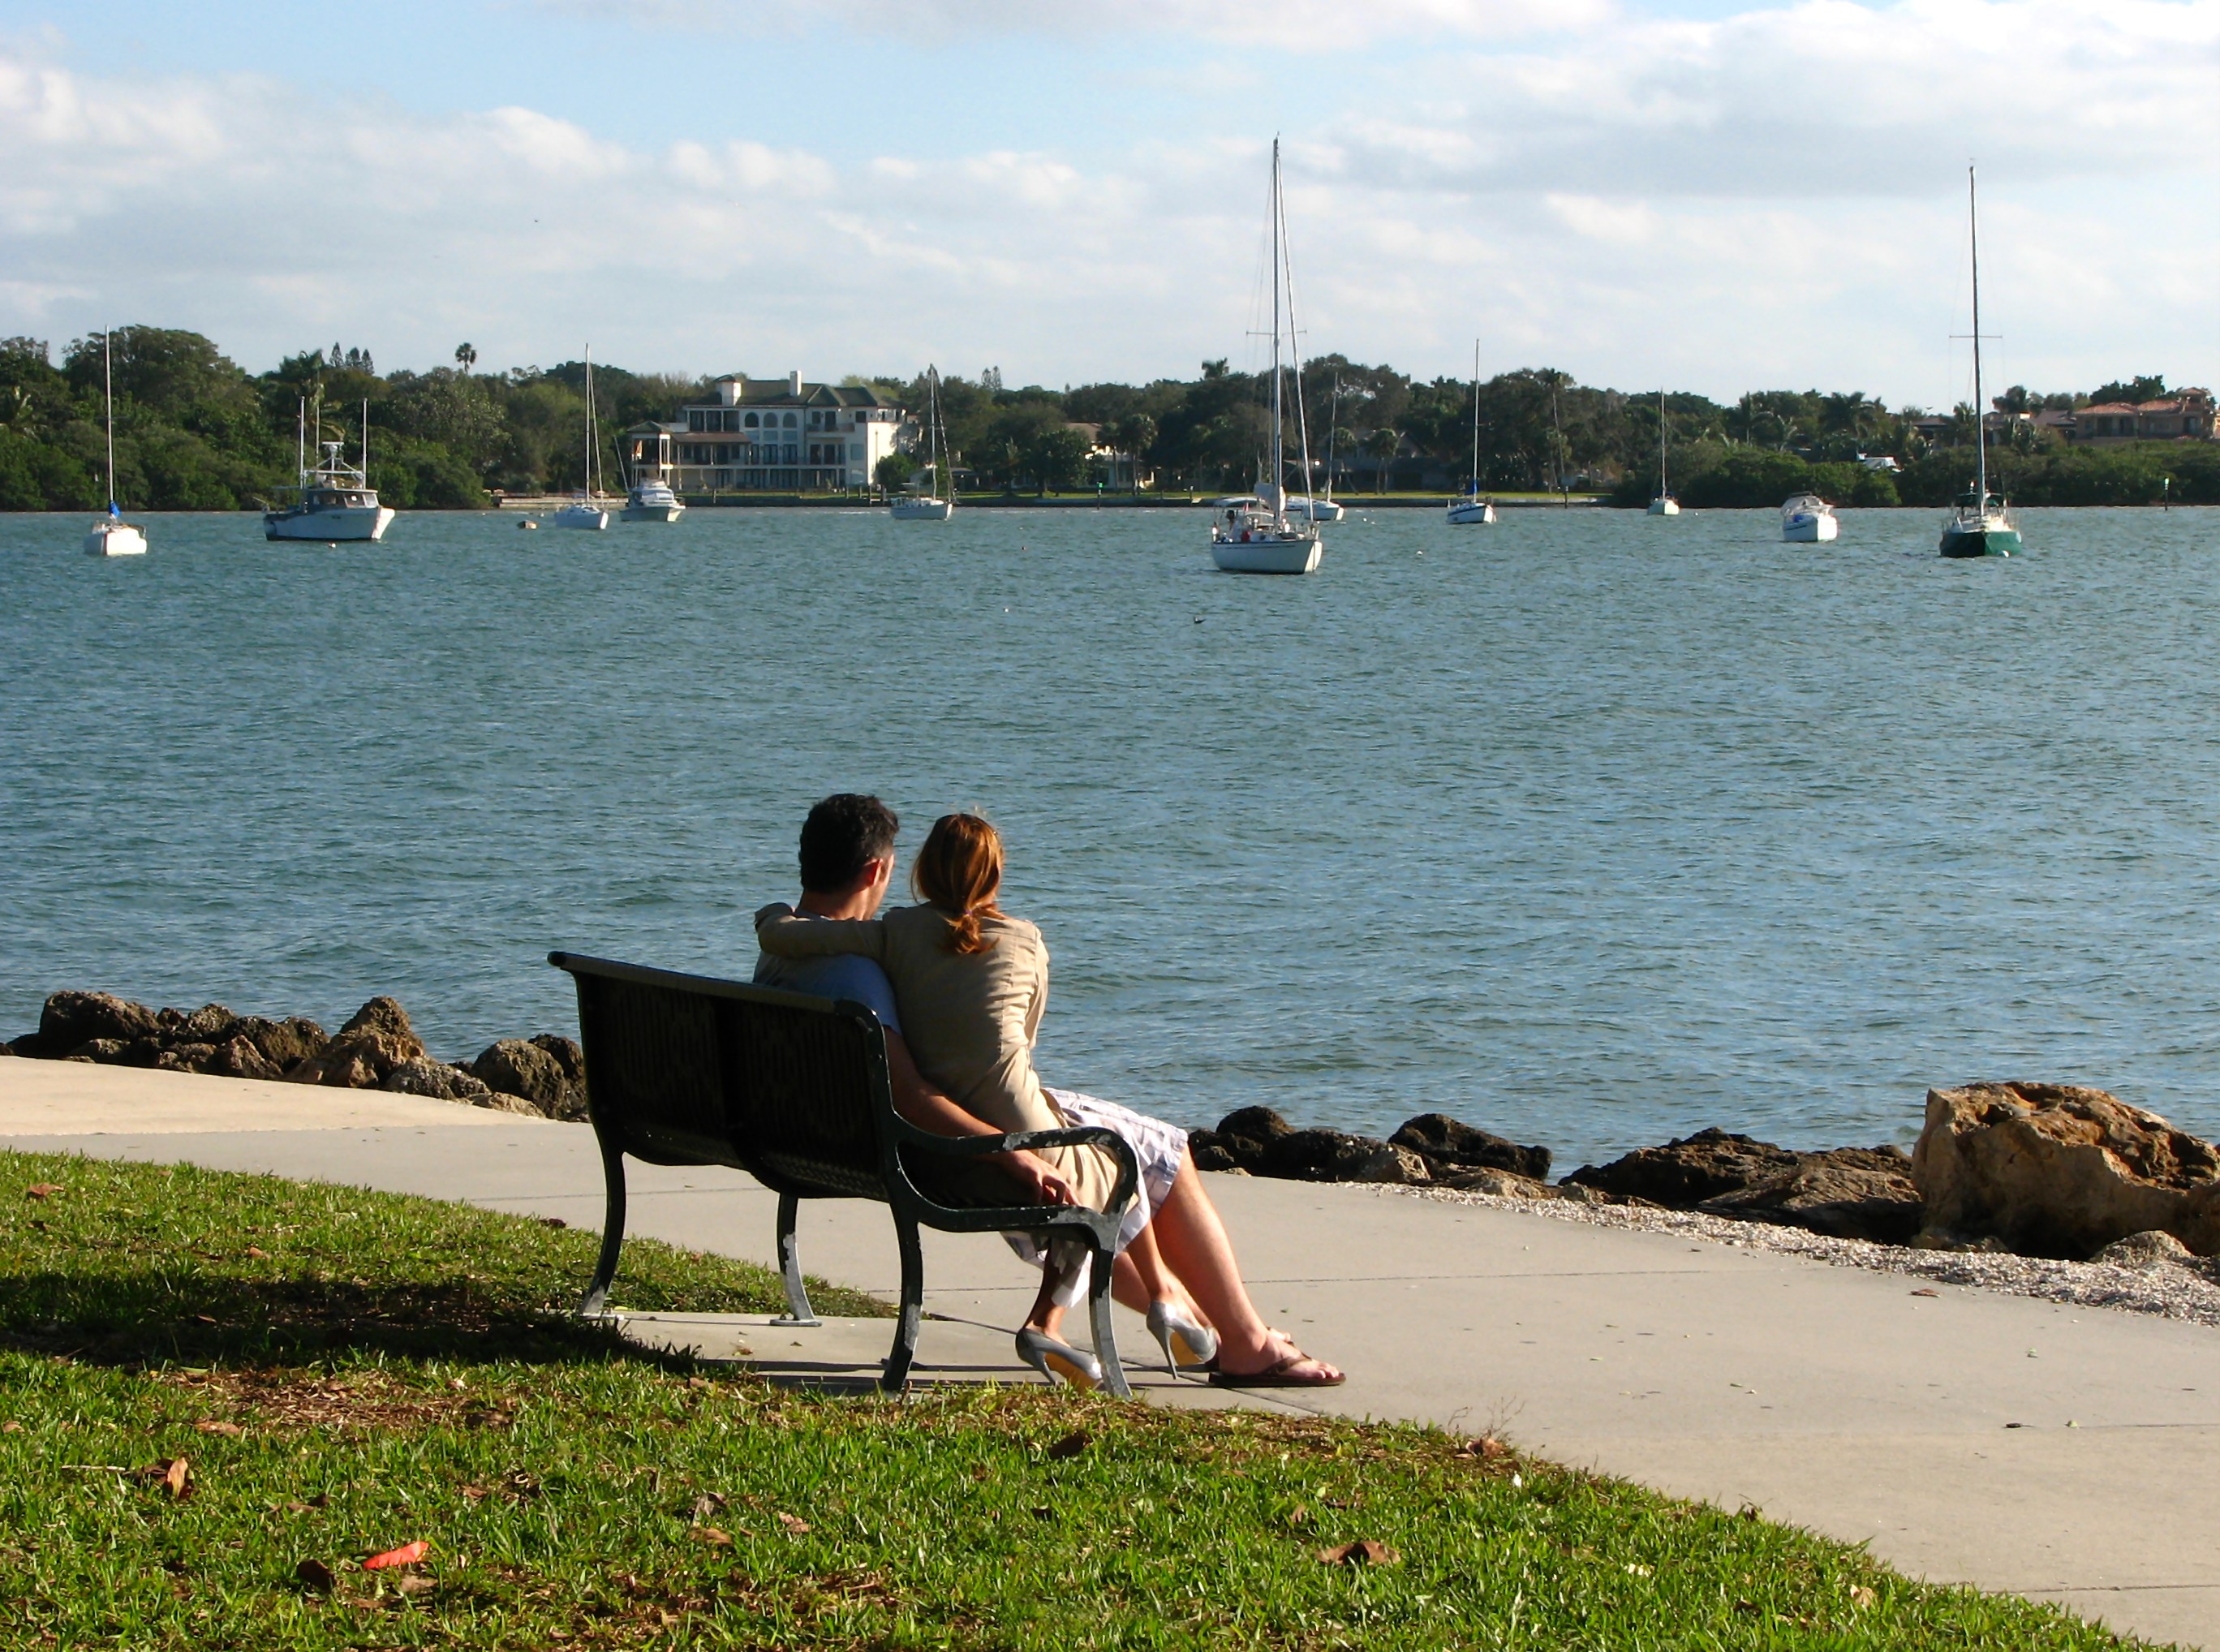 A couple sitting on a bench photo